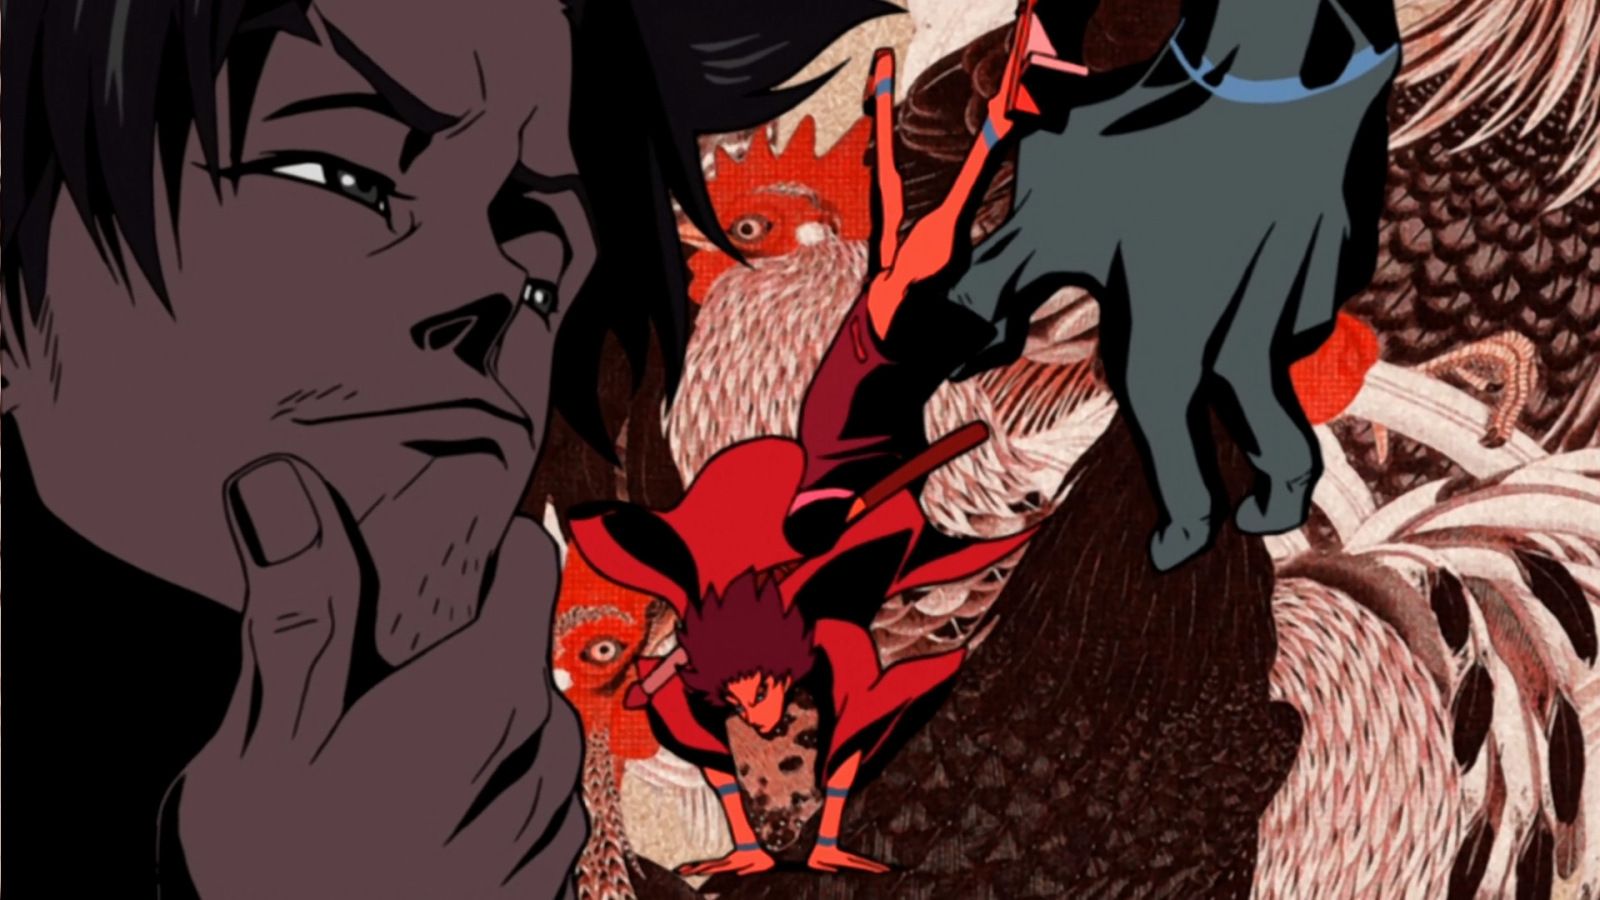 An image of Mugen from Samurai Champloo. A tall man with bushy hair and tattoos on his wrists. He stands in front of a rooster print background.